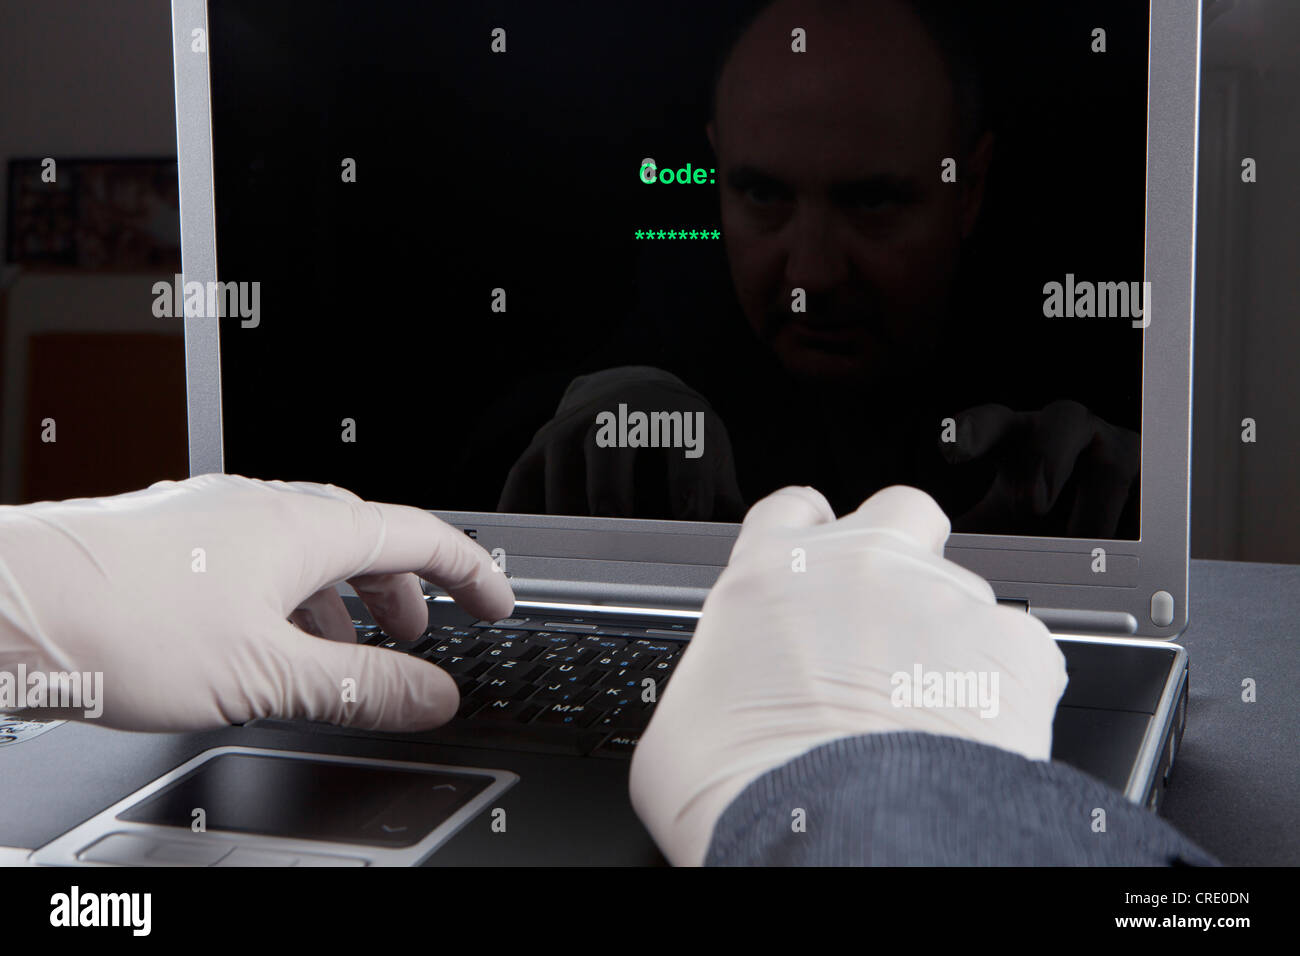 Hacker using a laptop, wearing latex gloves to leave no traces, symbolic image for Internet crime Stock Photo